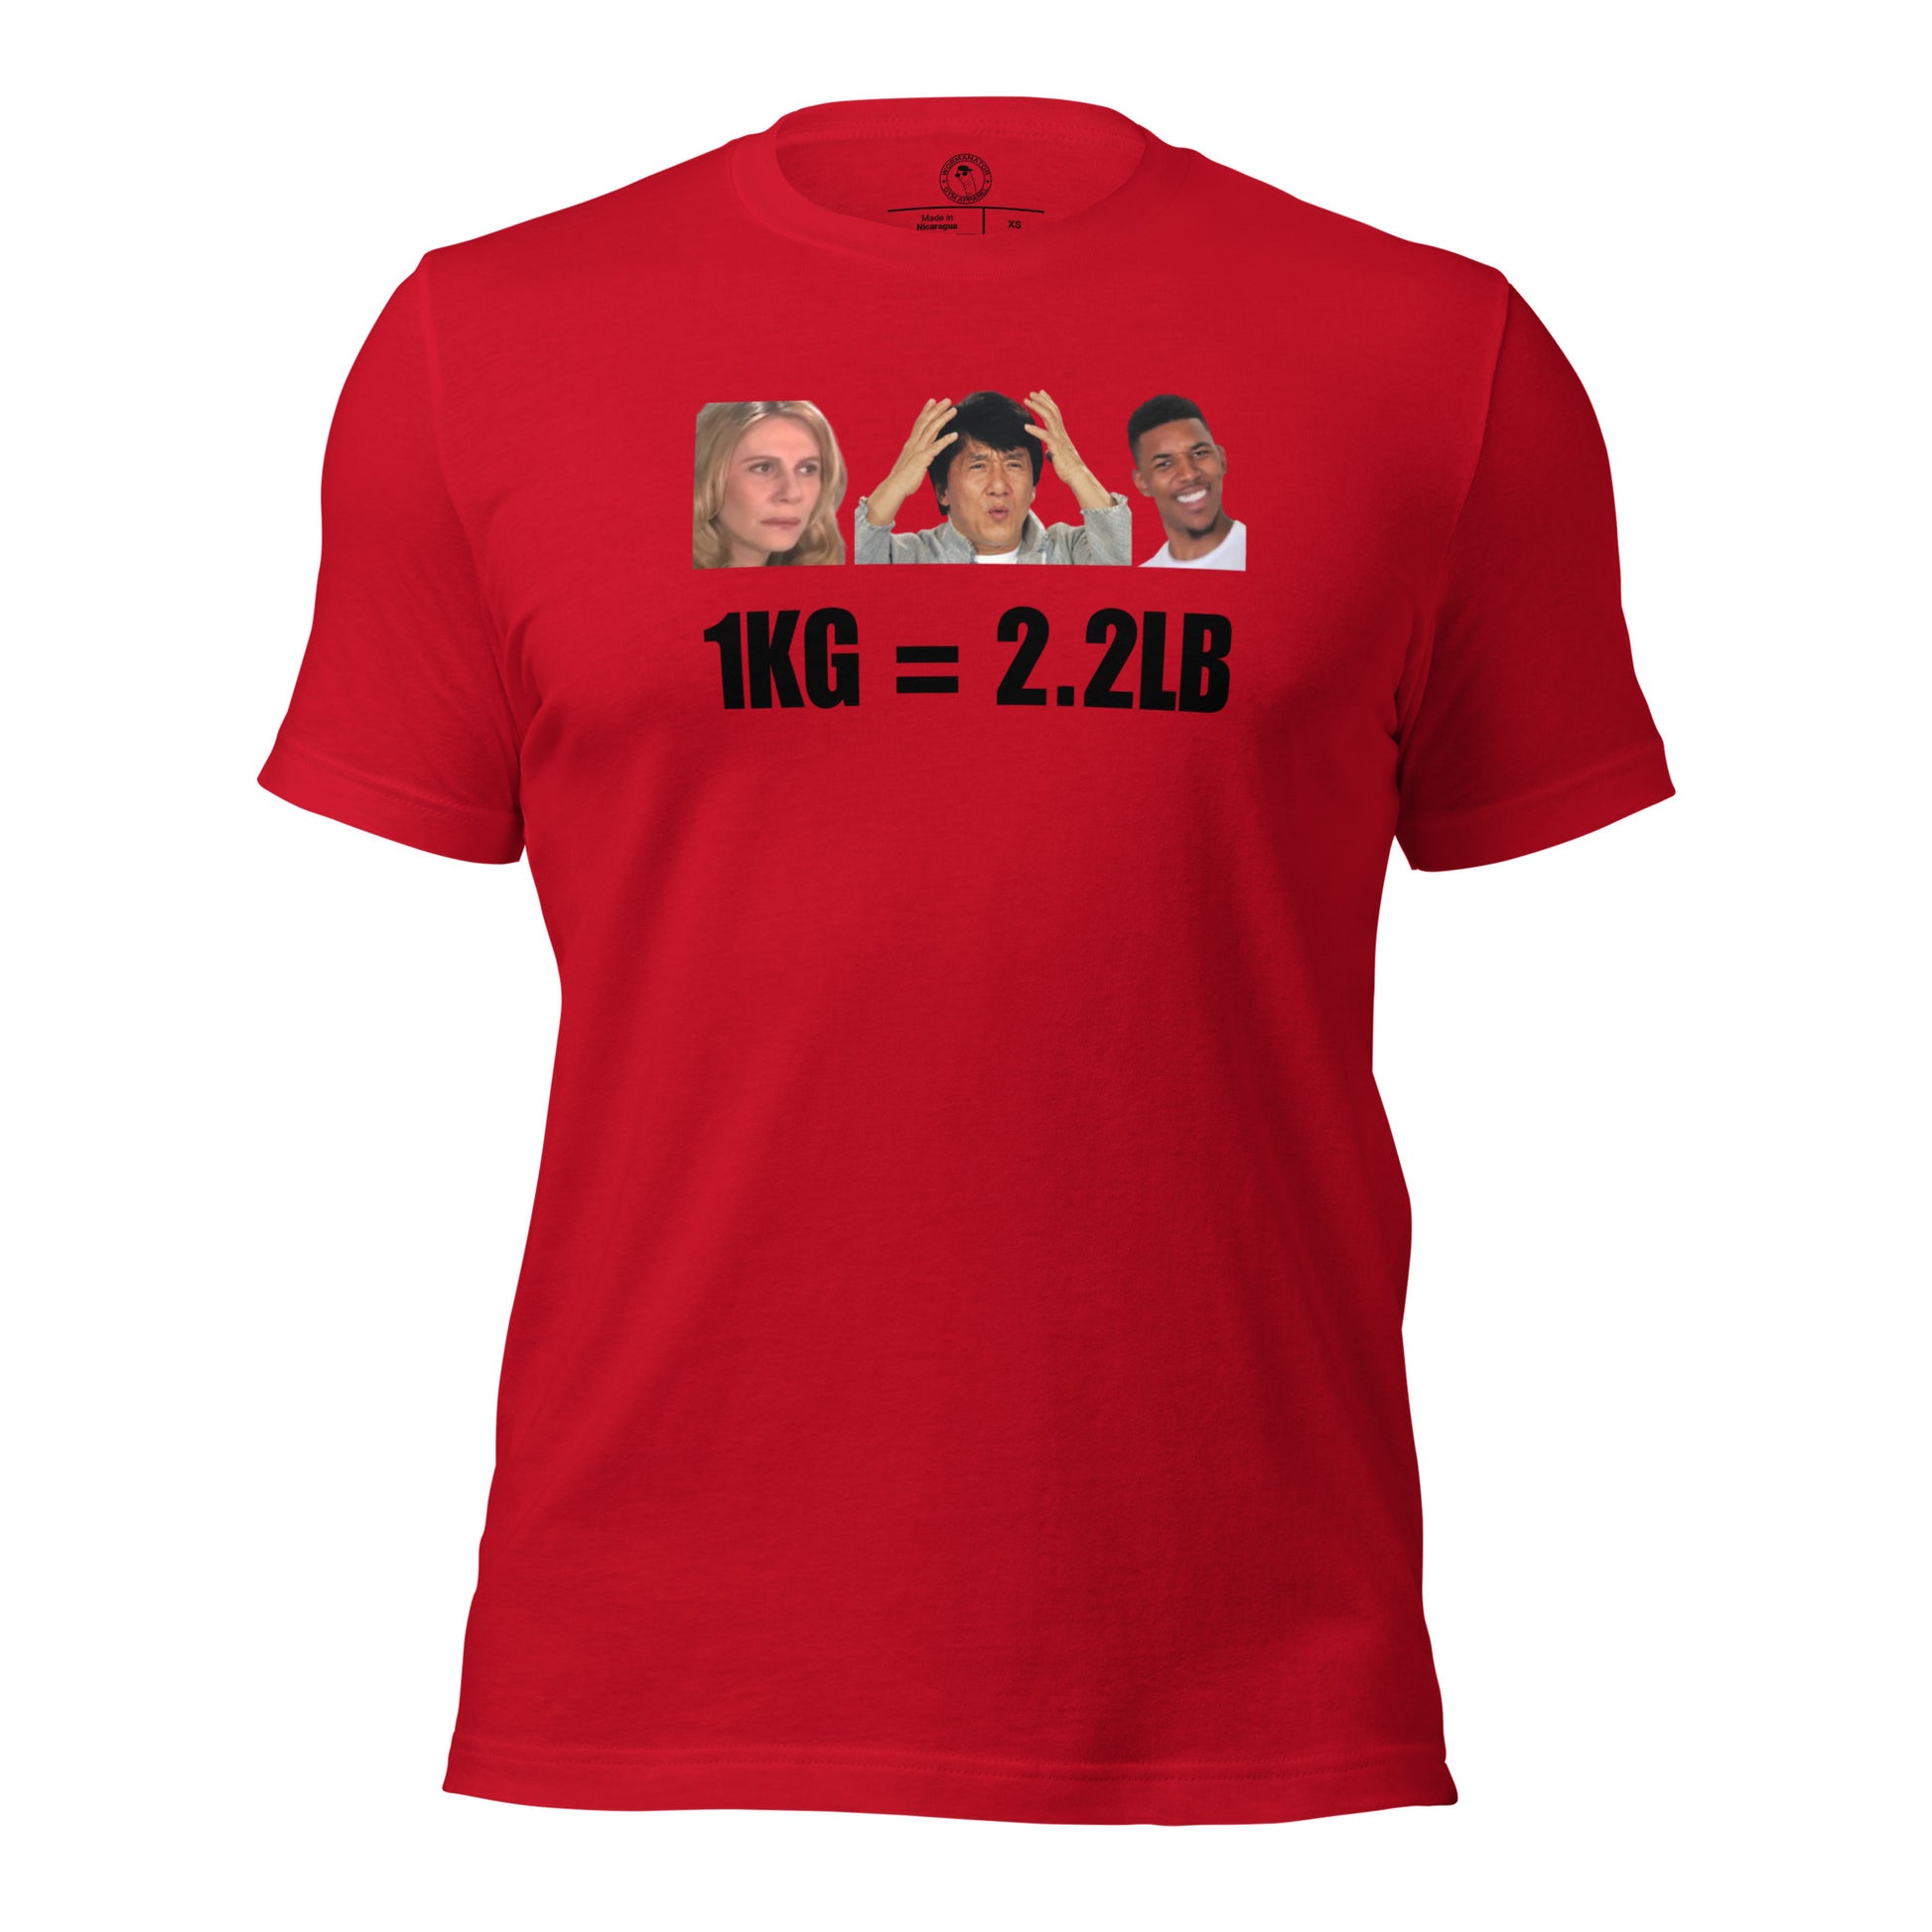 1kg = 2.2lb Powerlifting Conversion Shirt in Red